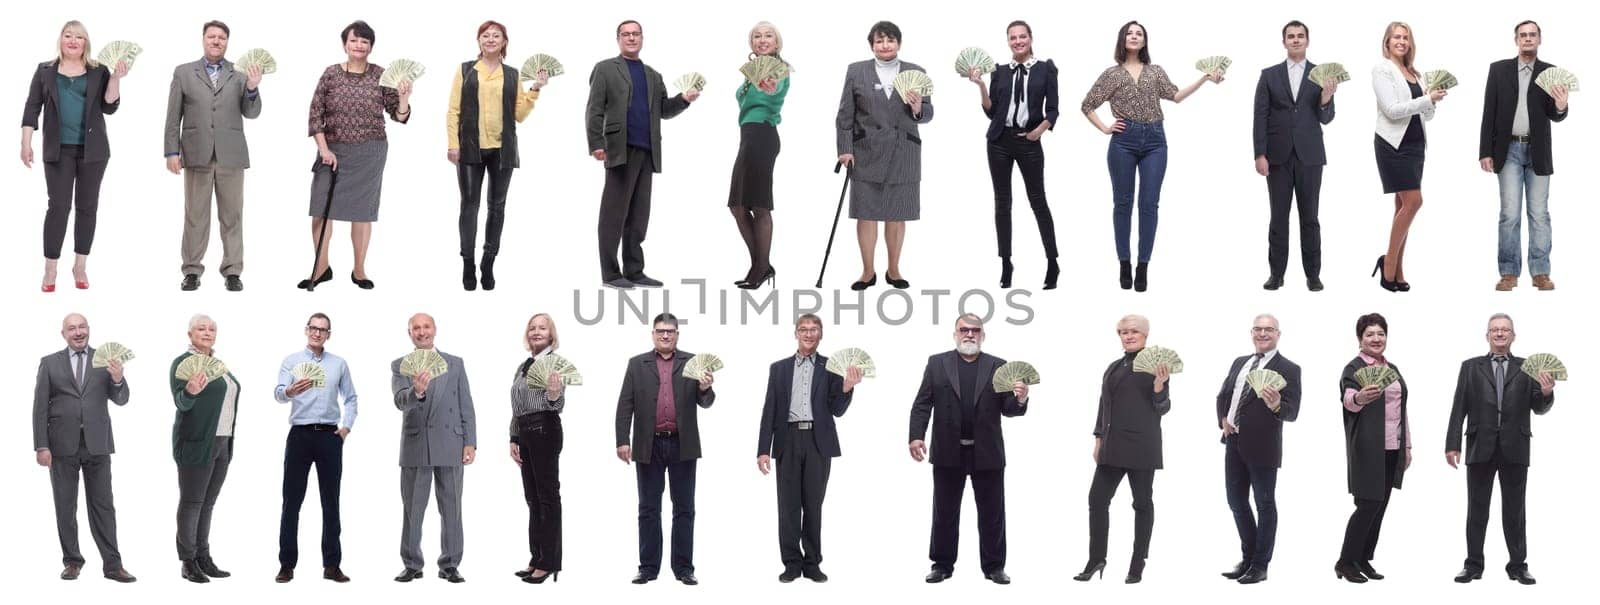 group of successful people holding money in hand by asdf